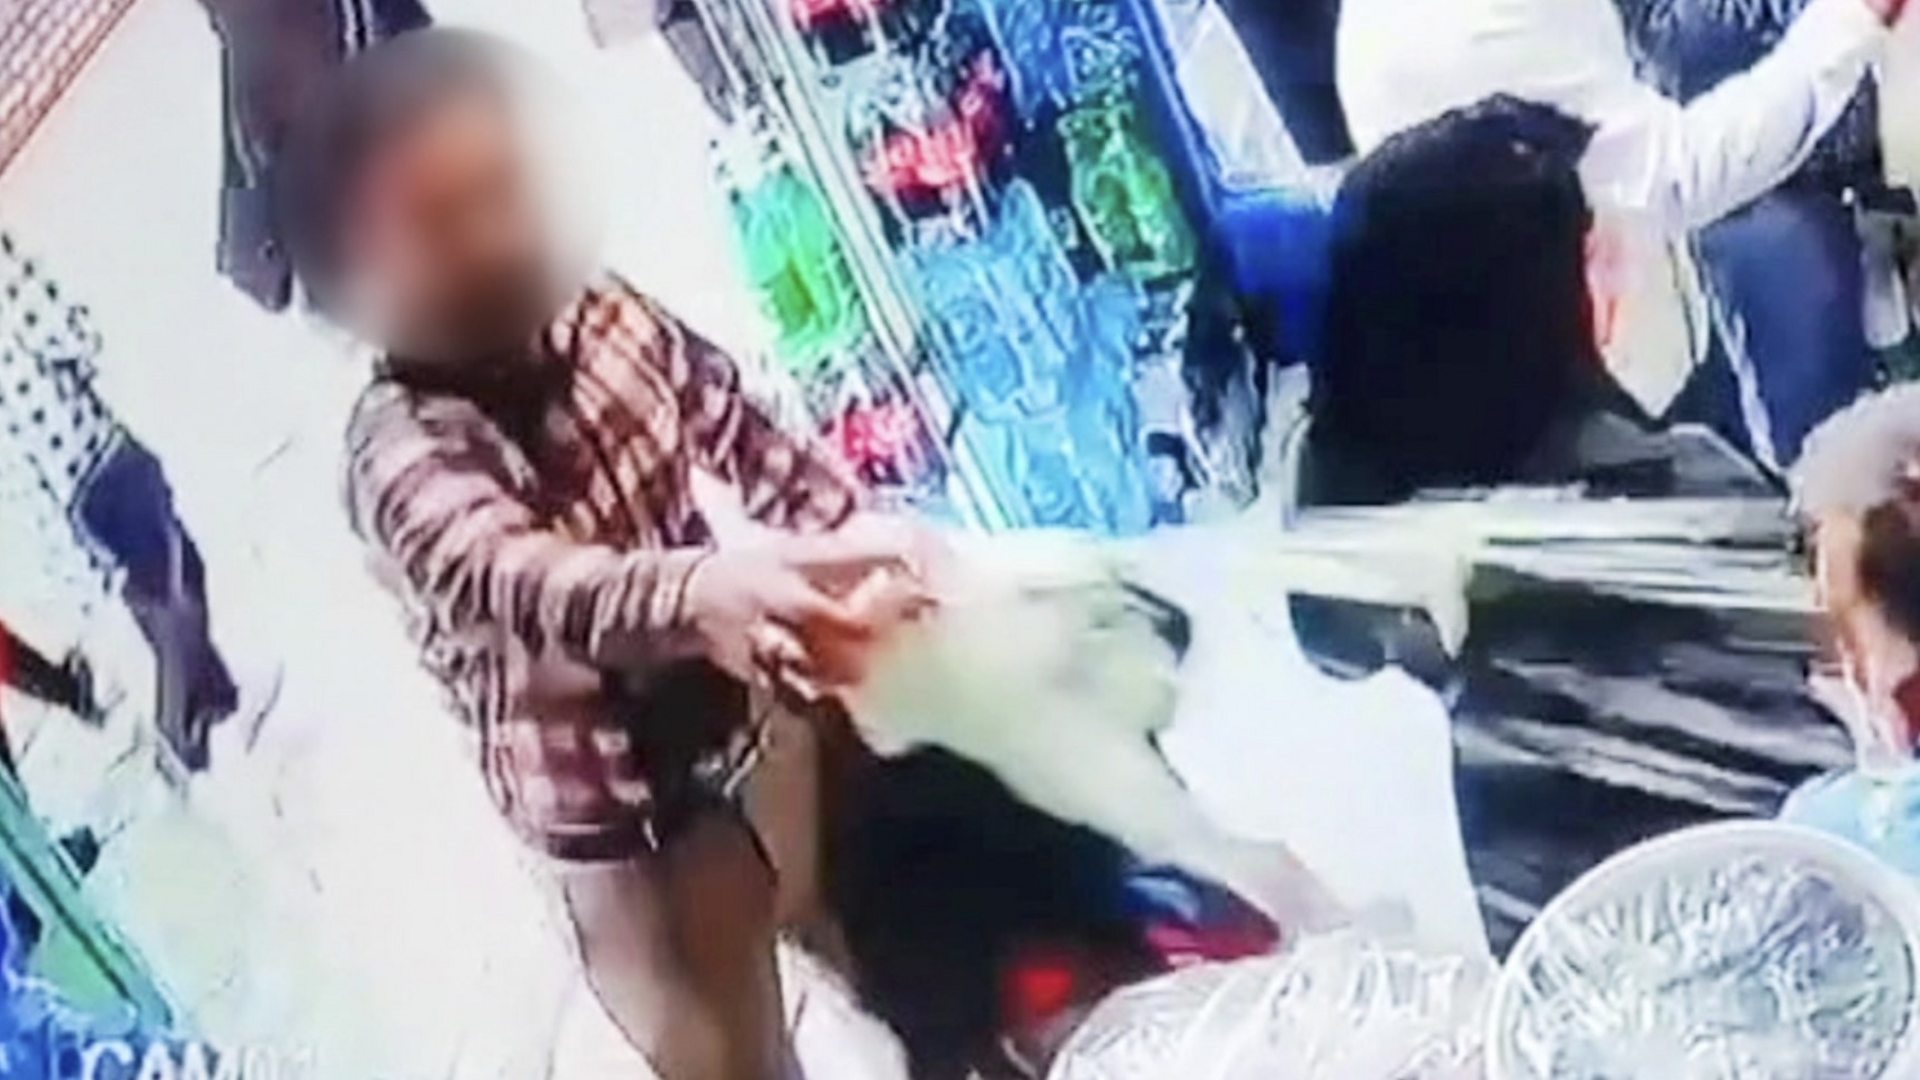 Man pours yoghurt over unveiled woman in Iran shop